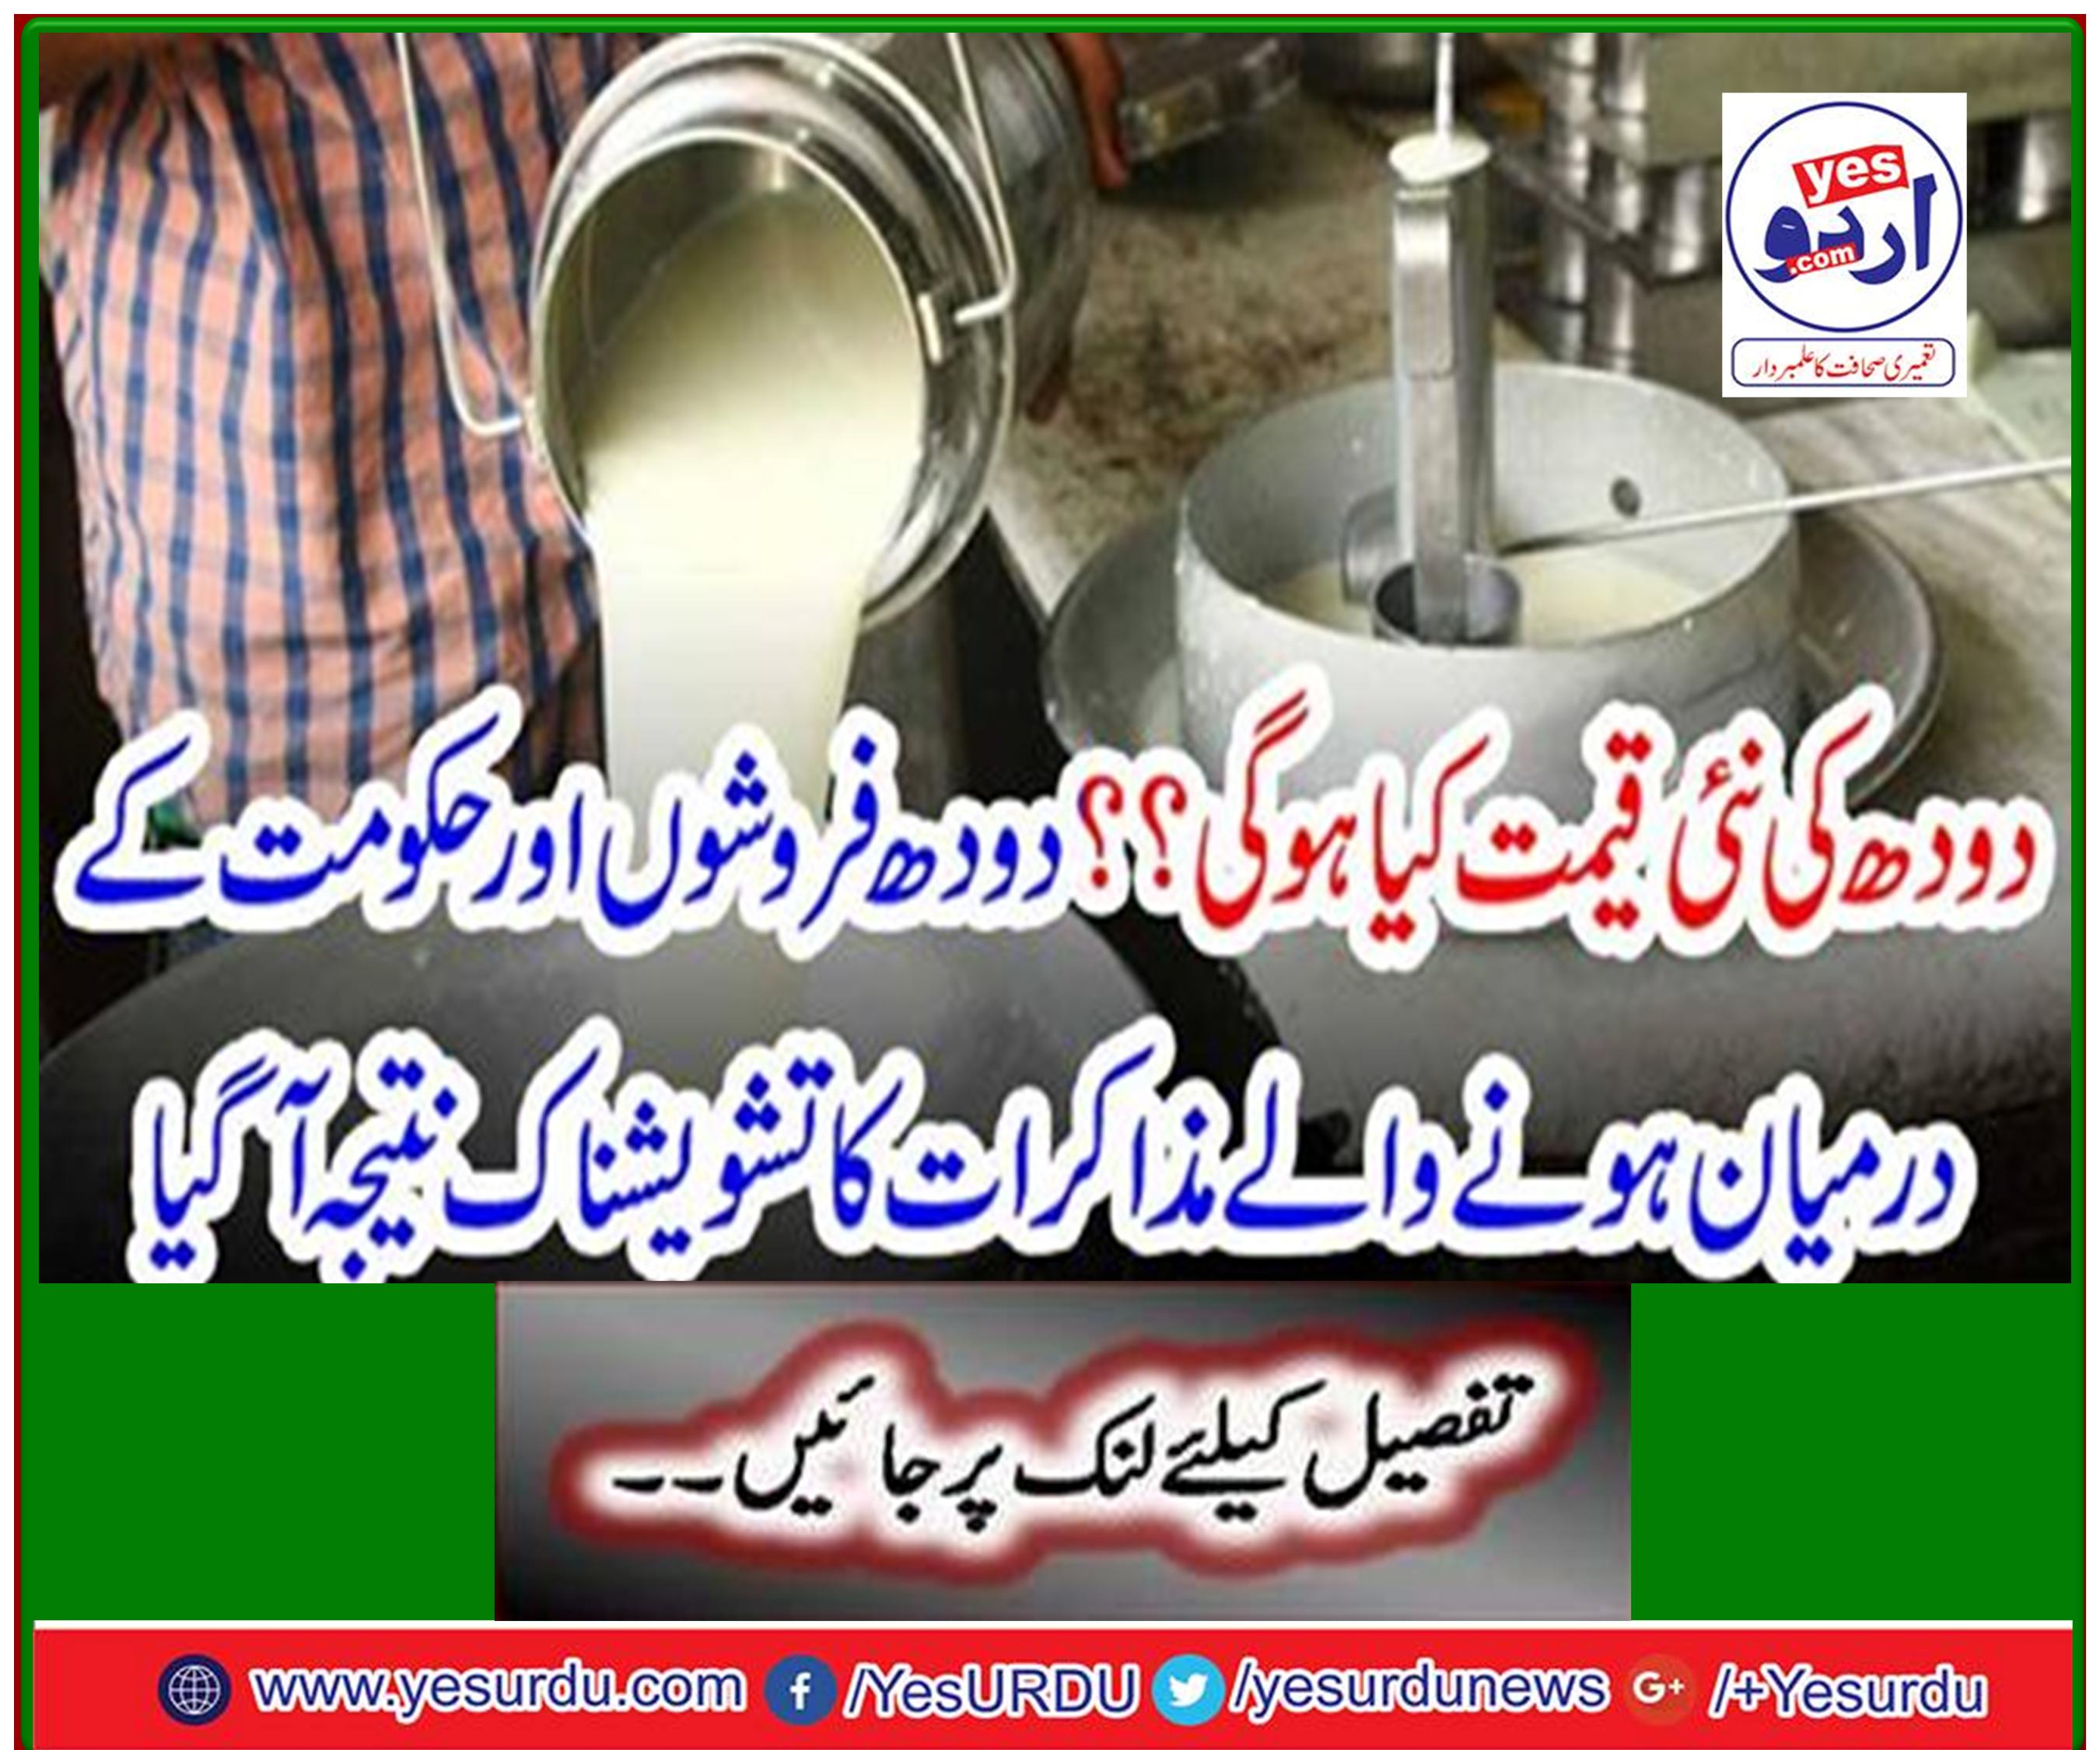 Negotiations between the milk producers and the government came to a gruesome conclusion